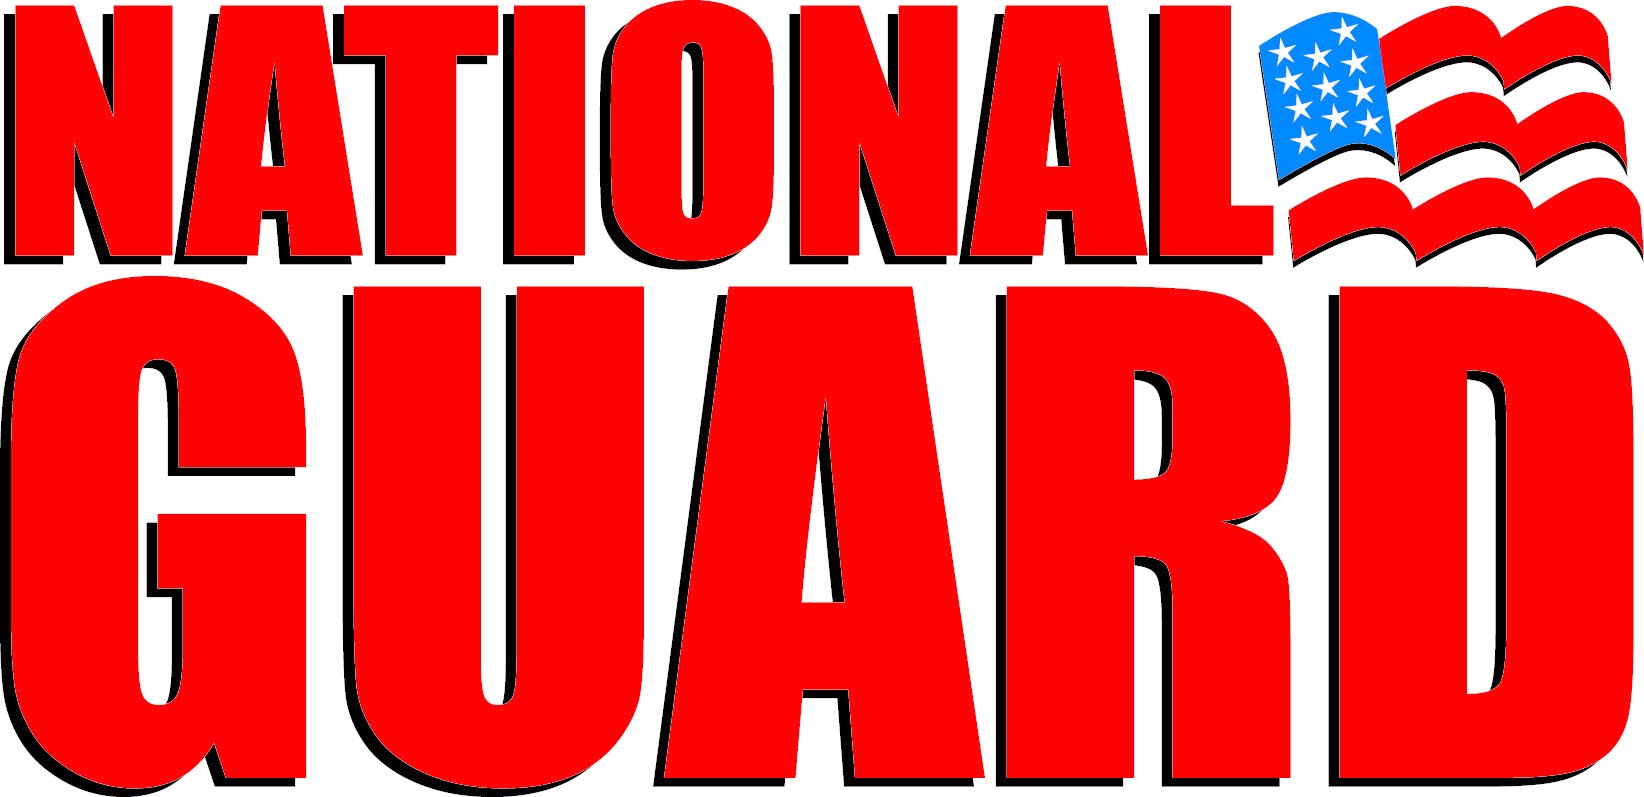 National Guard Wallpapers